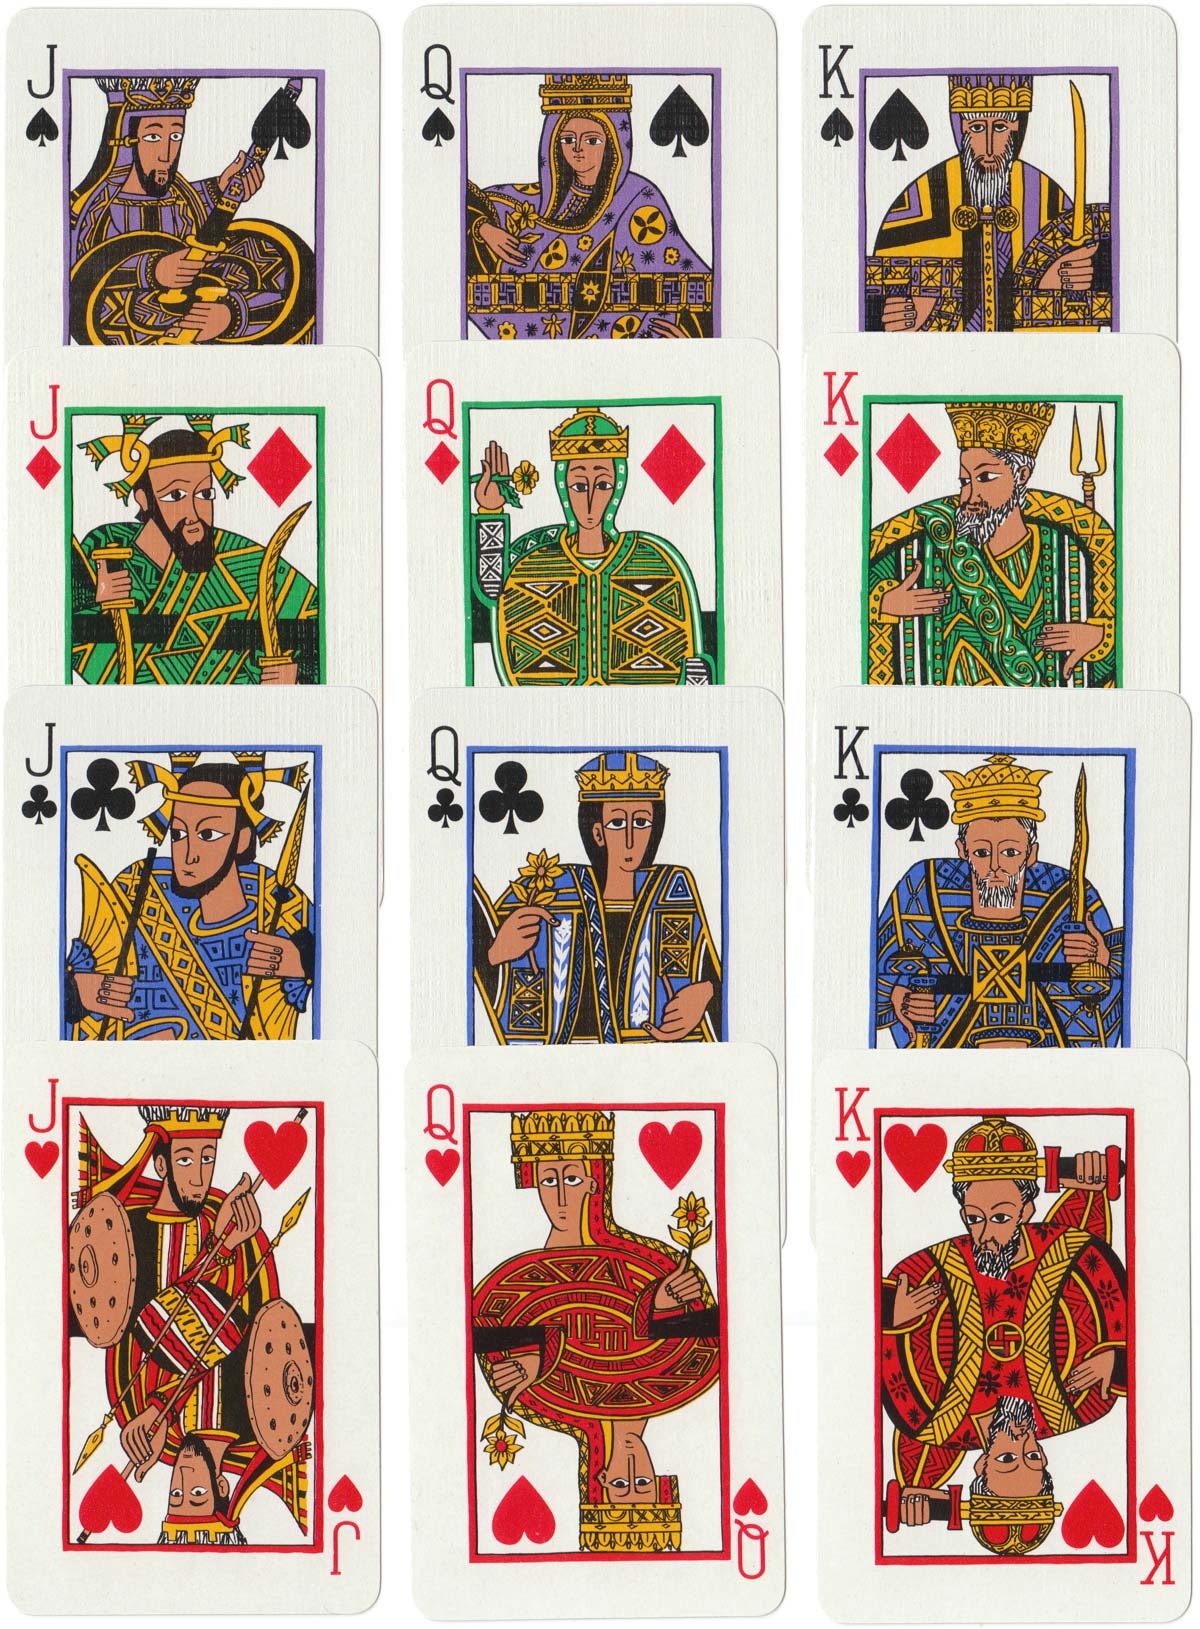 Ethiopian playing cards designed for the Ethiopian Tourist Organization by Afewerk Teklé